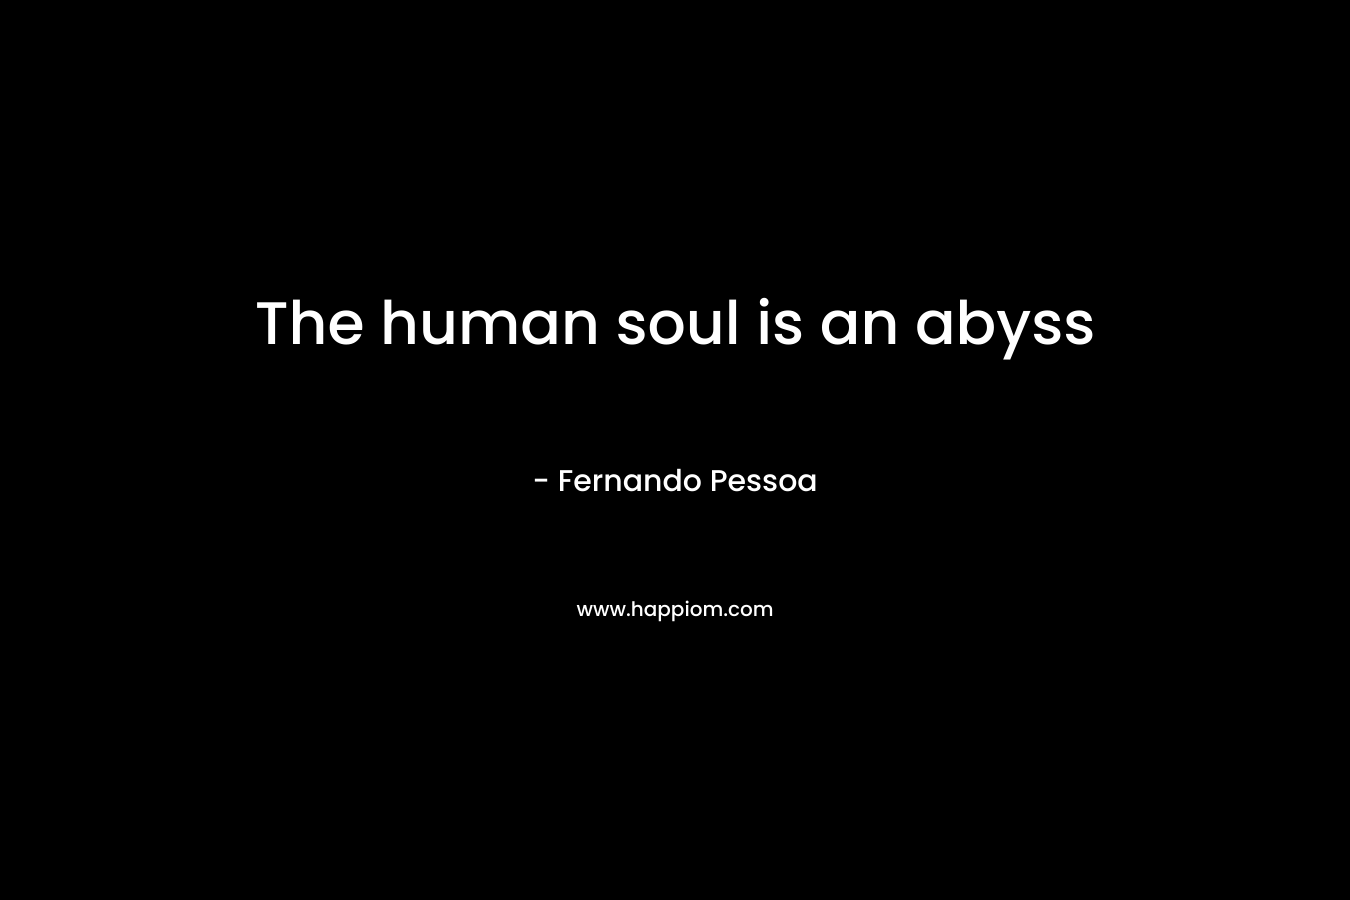 The human soul is an abyss